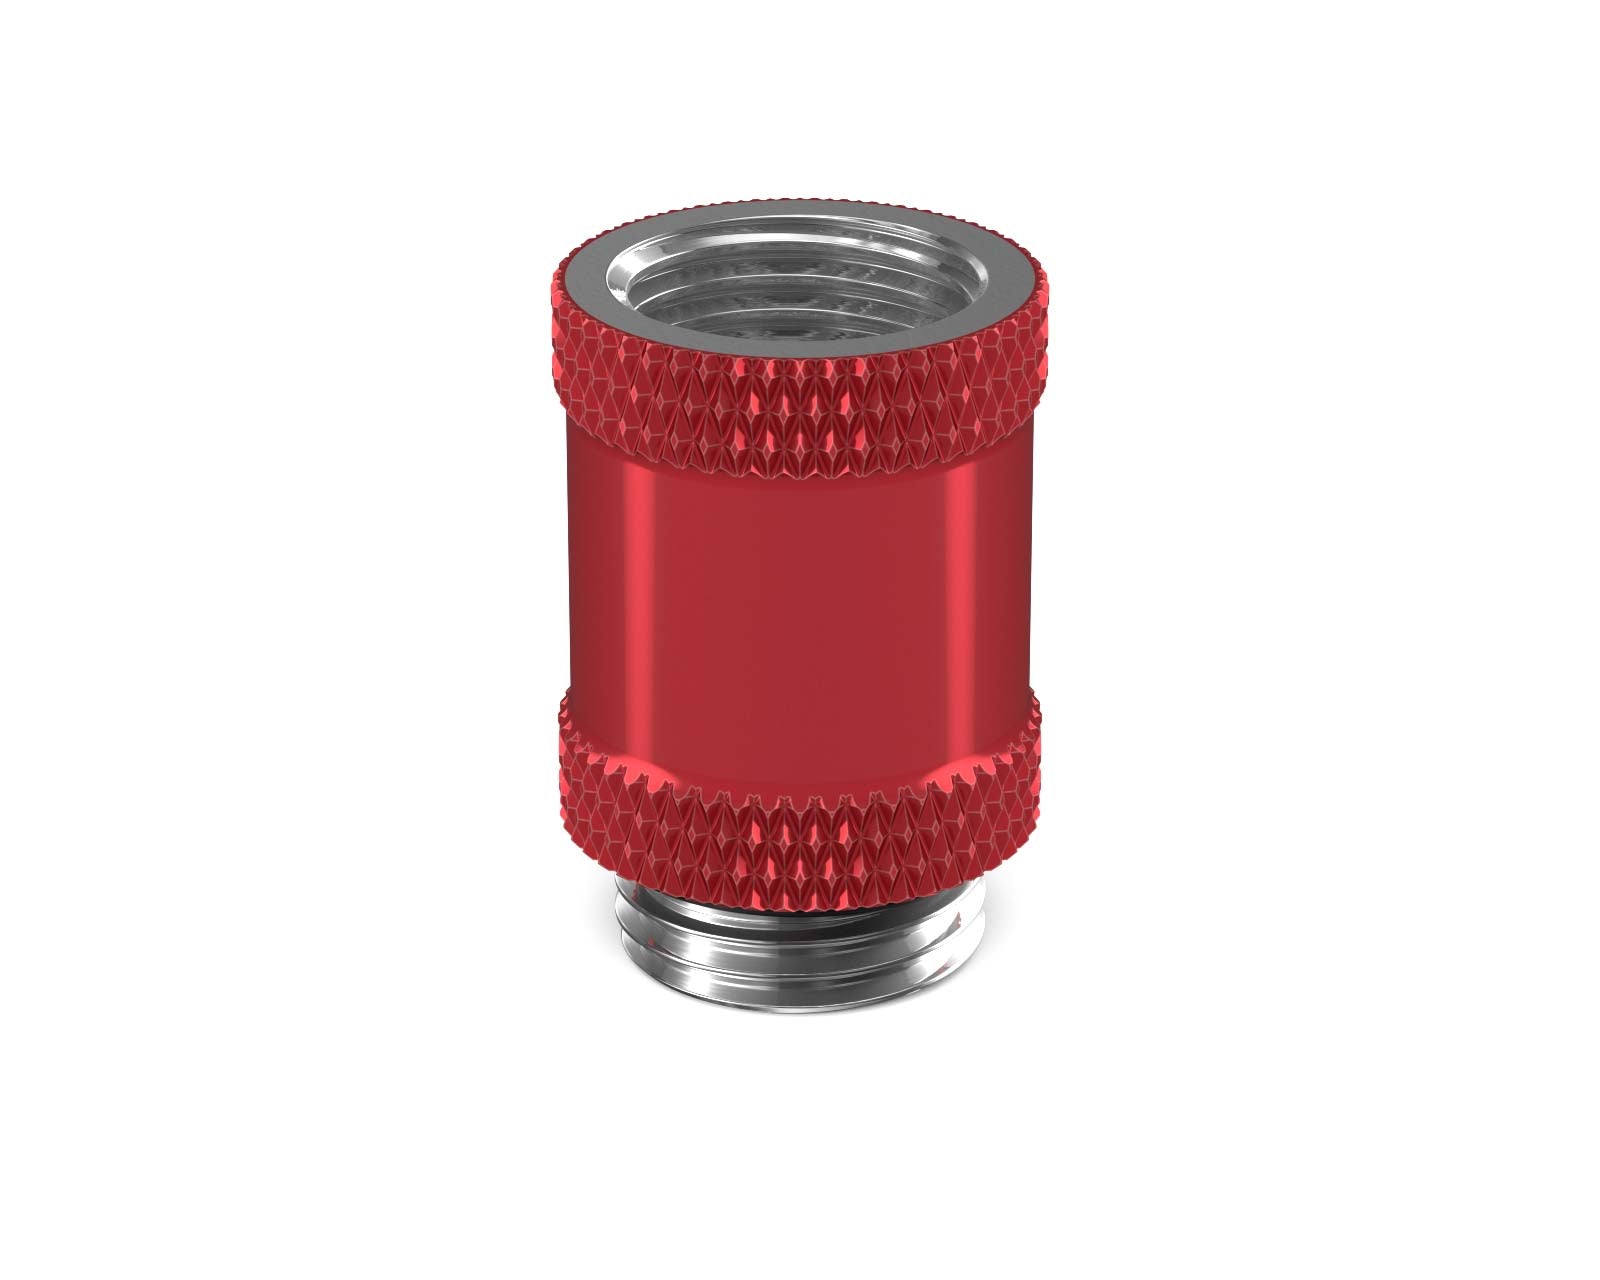 PrimoChill Male to Female G 1/4in. 20mm SX Extension Coupler - PrimoChill - KEEPING IT COOL Candy Red